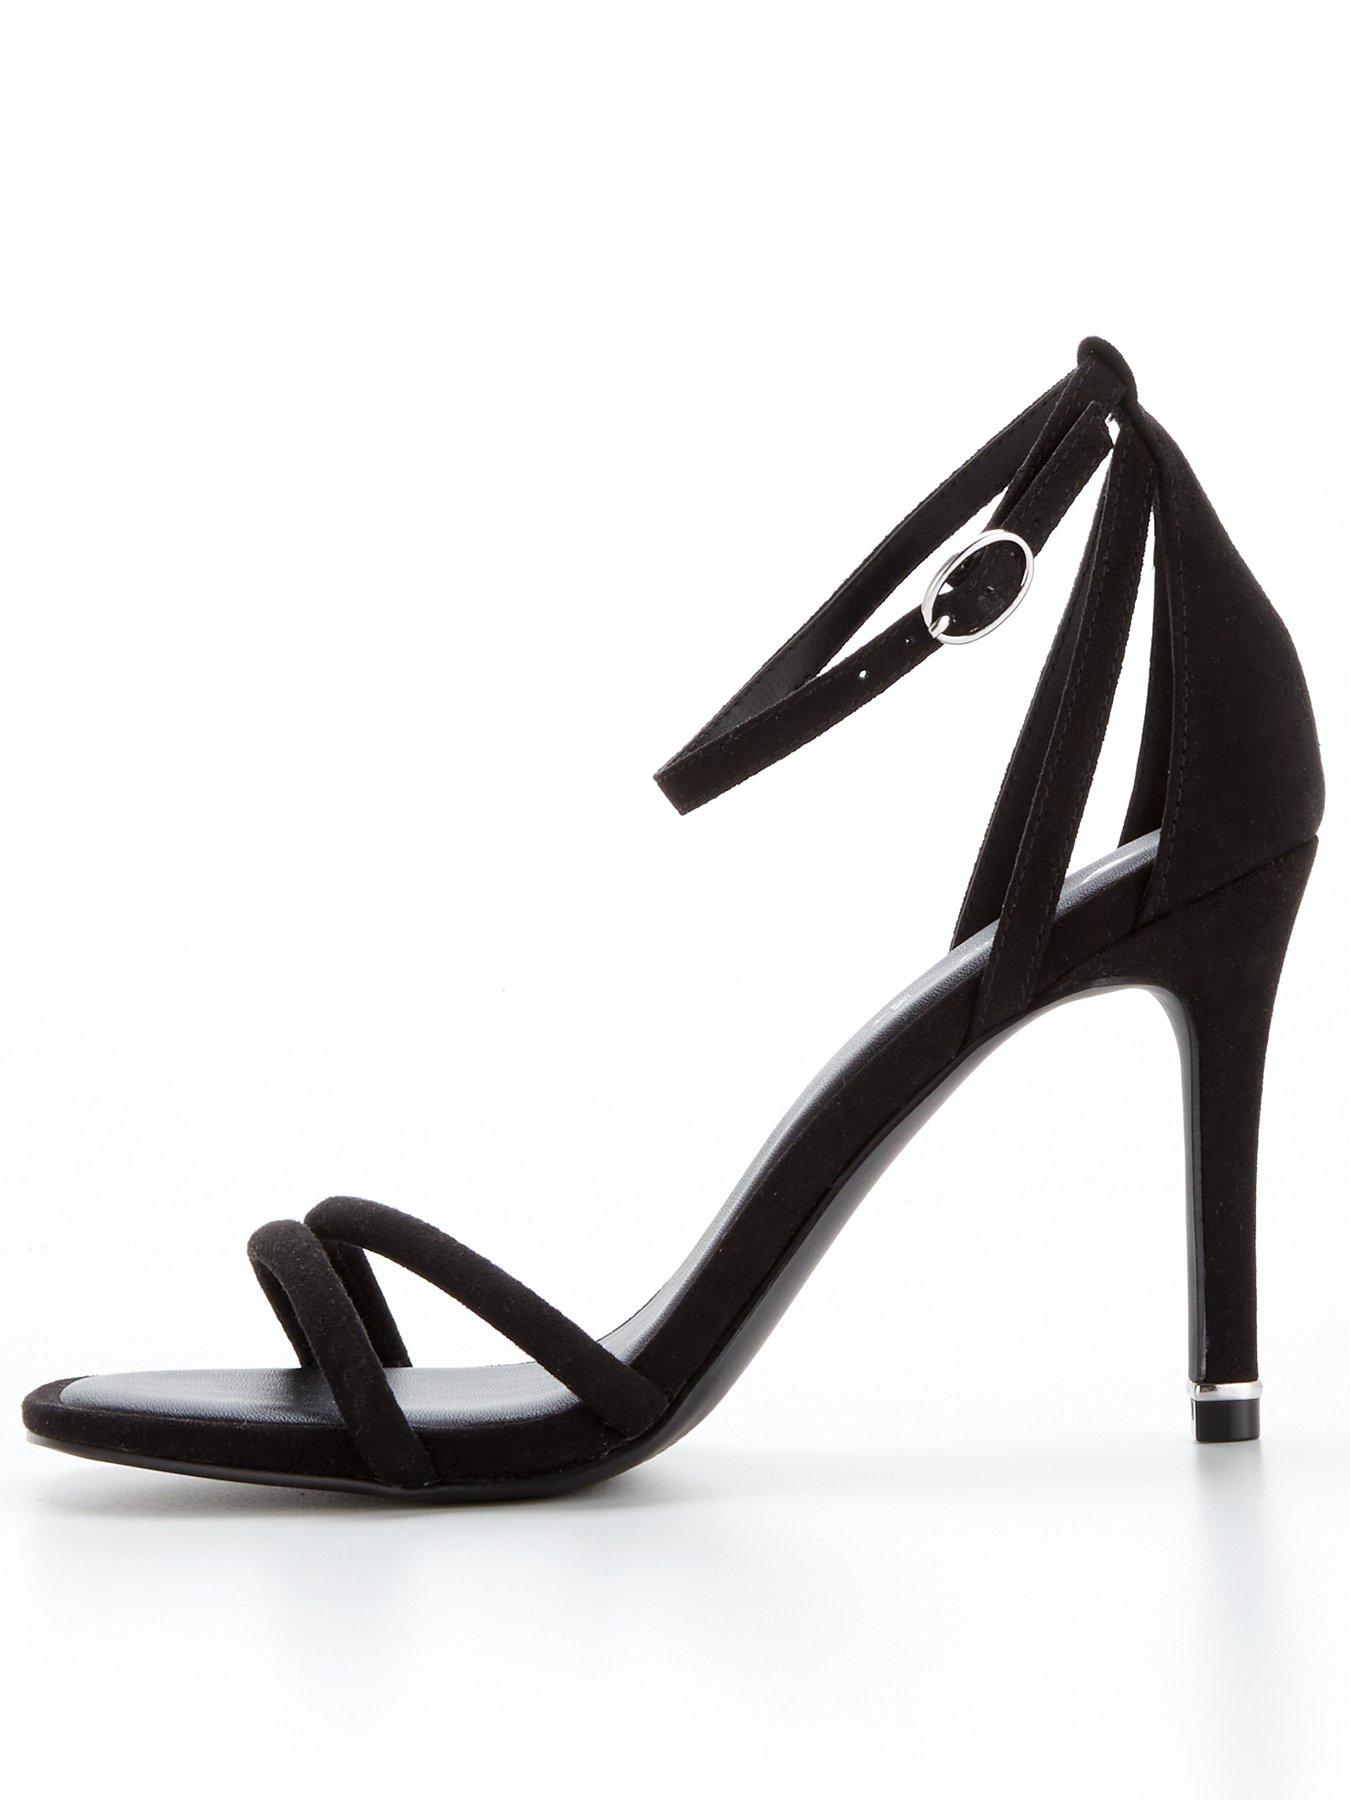 V by Very Braxton Wide Fit Barely There Heeled Sandal - Black | very.co.uk